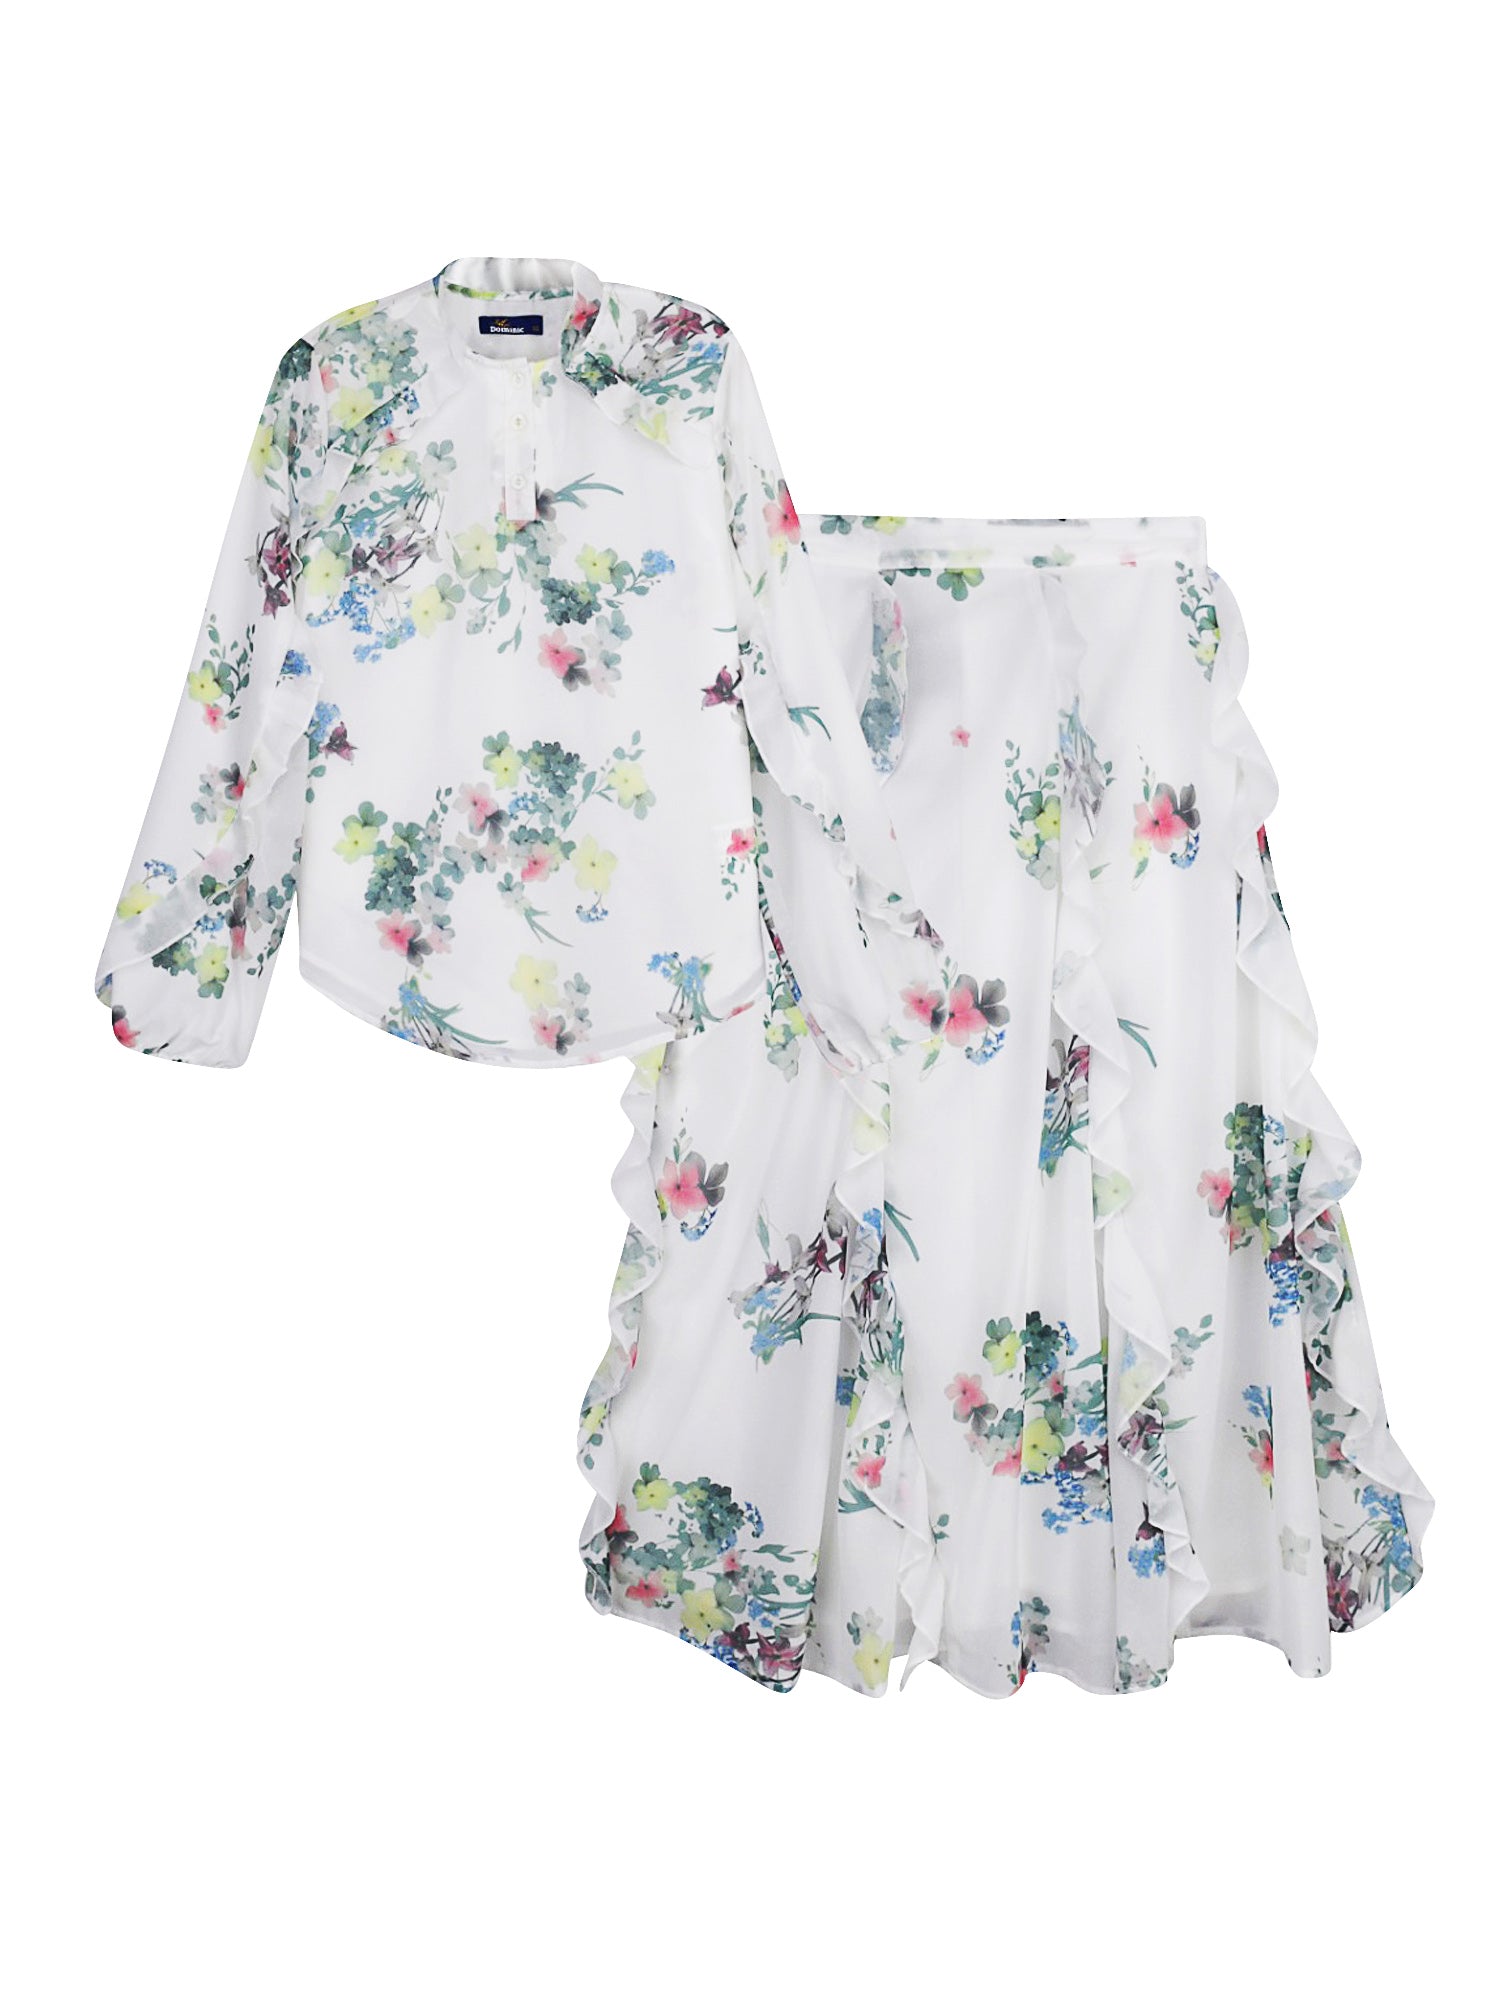 Dominic Floral Ruffle Blouse - Tops